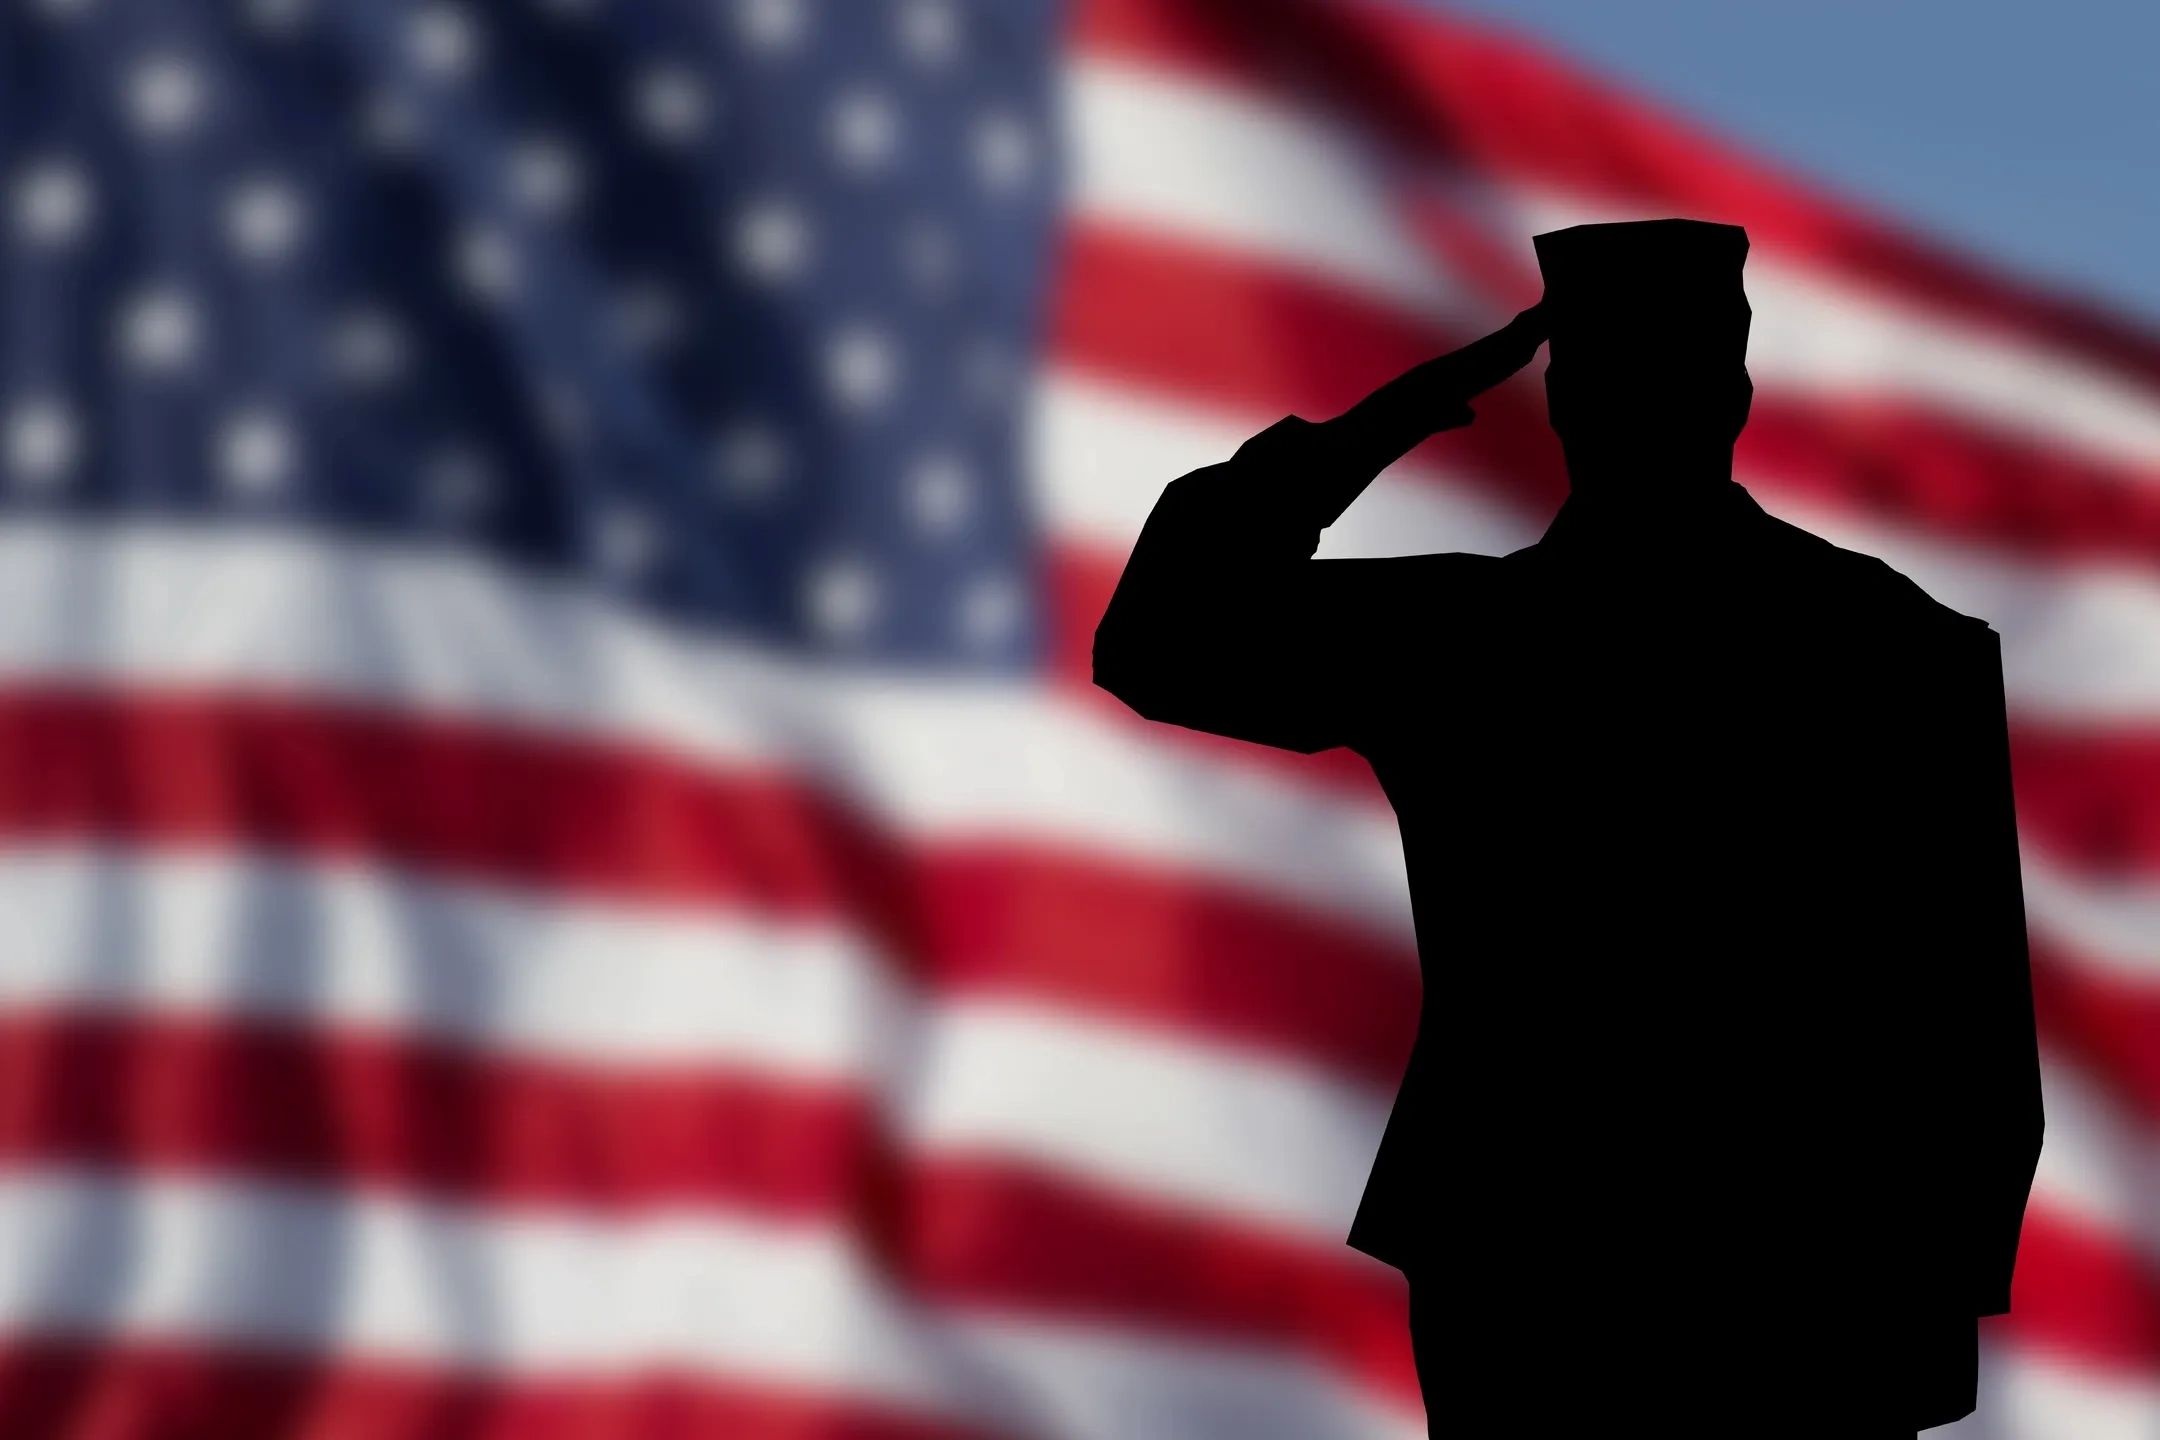 Mock image of a solider standing in front of the American flag.